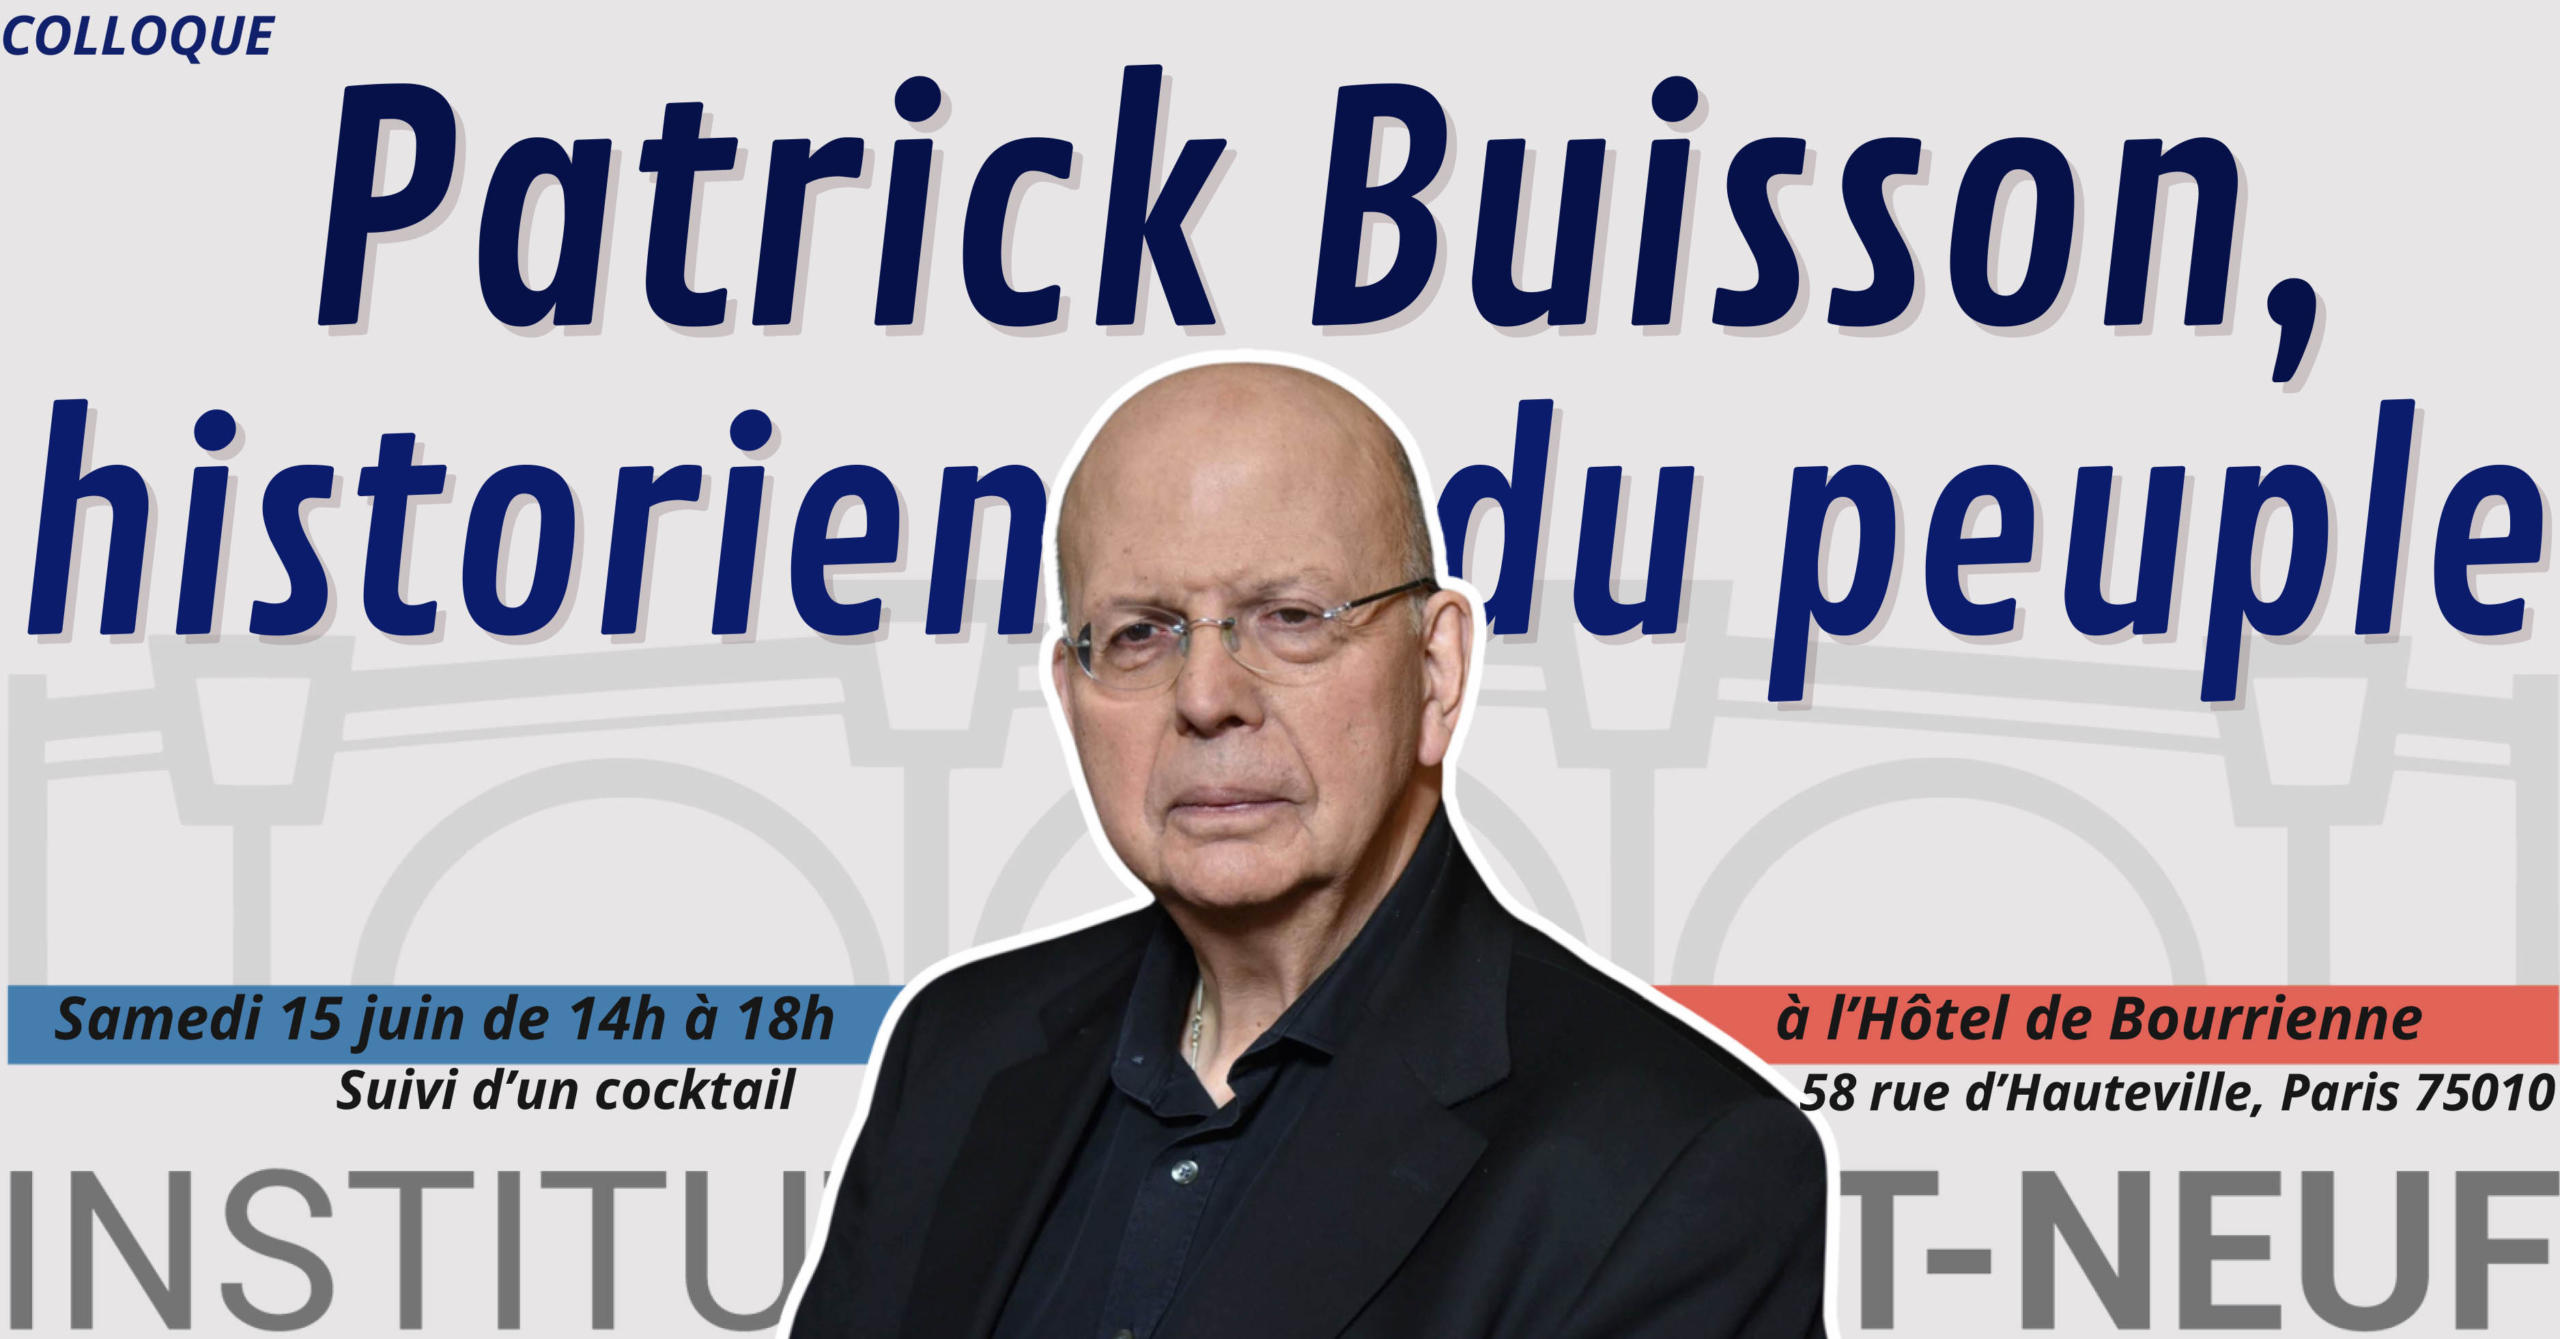 You are currently viewing Patrick Buisson, historien du peuple